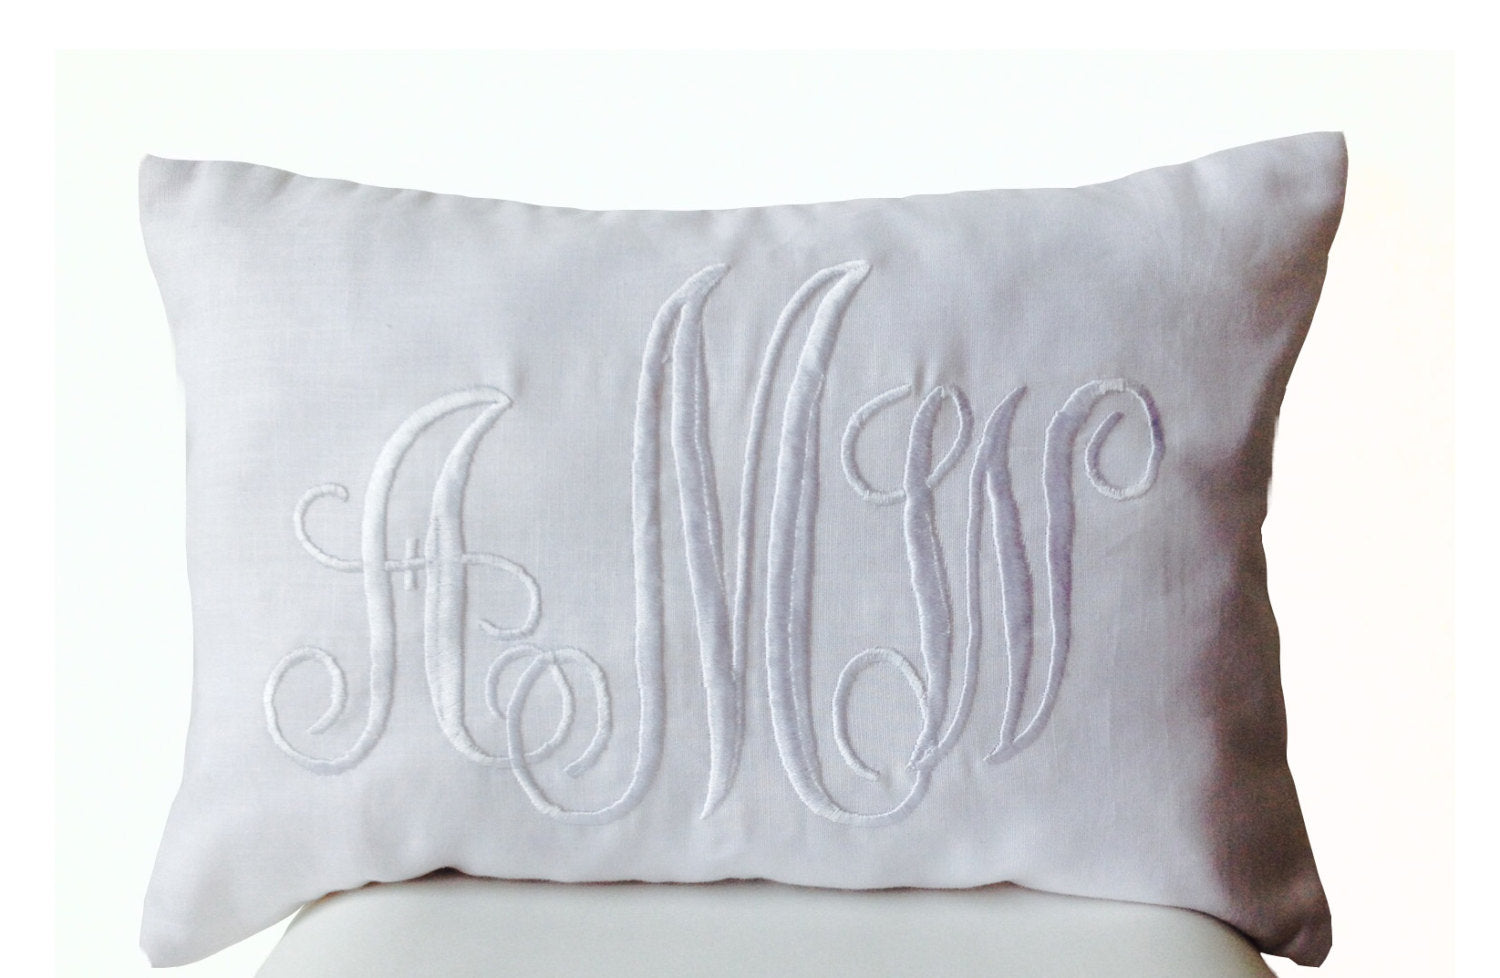 Monogram Throw Pillow Covers – A Gift Personalized